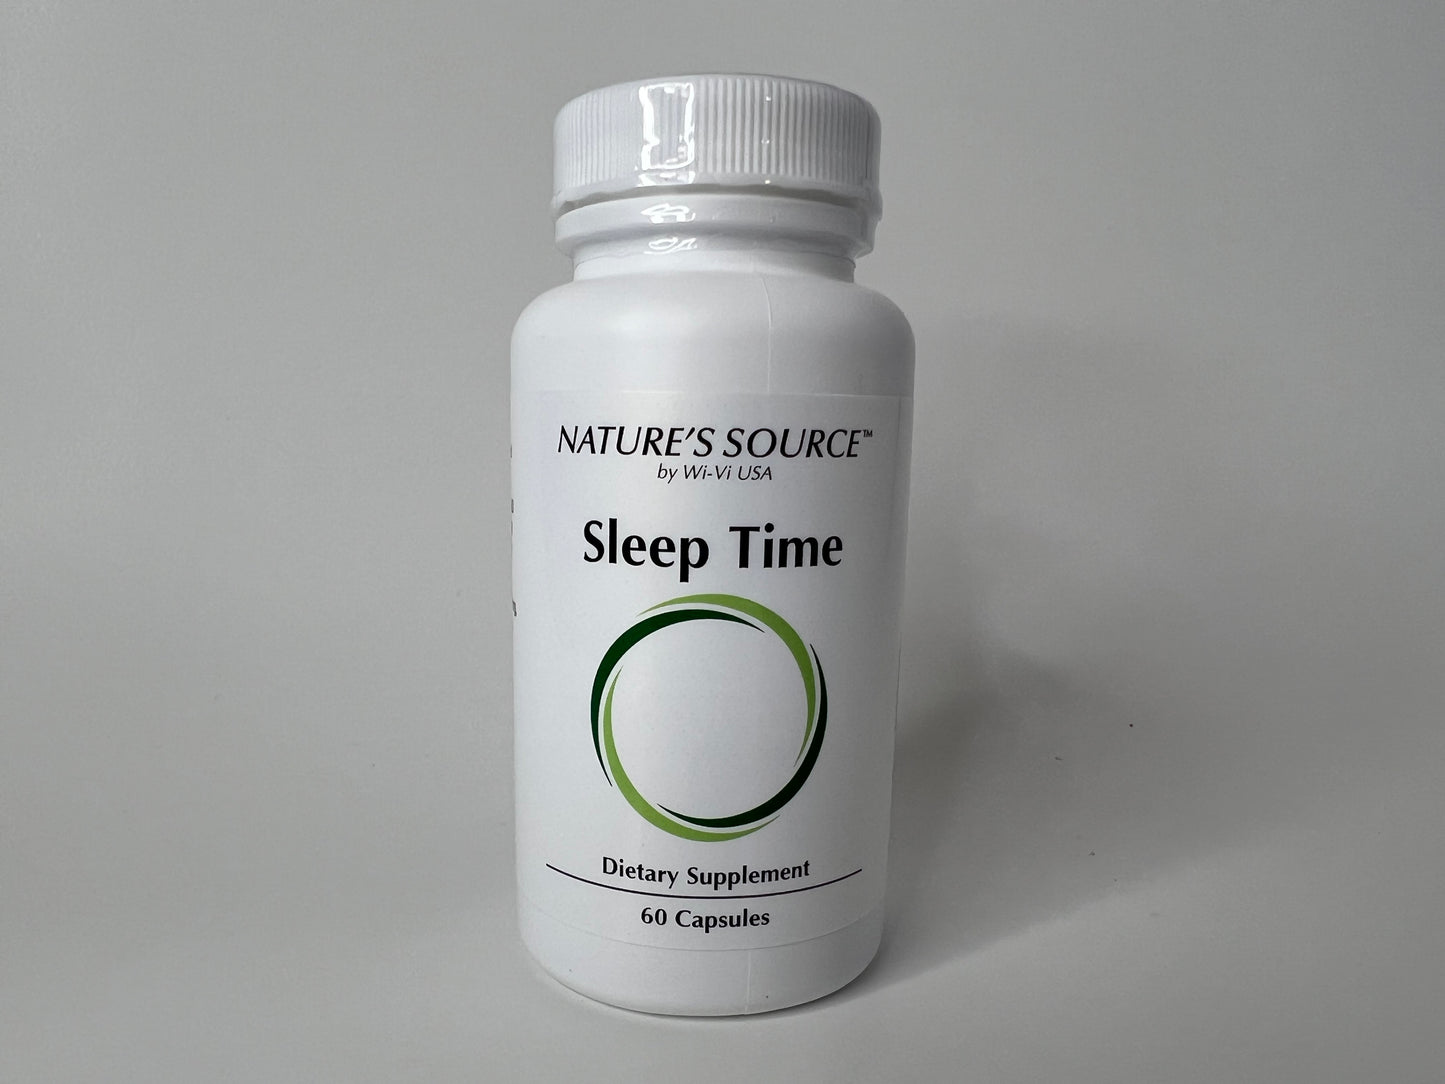 Sleep Time (60 Capsules) by: Nature's Source